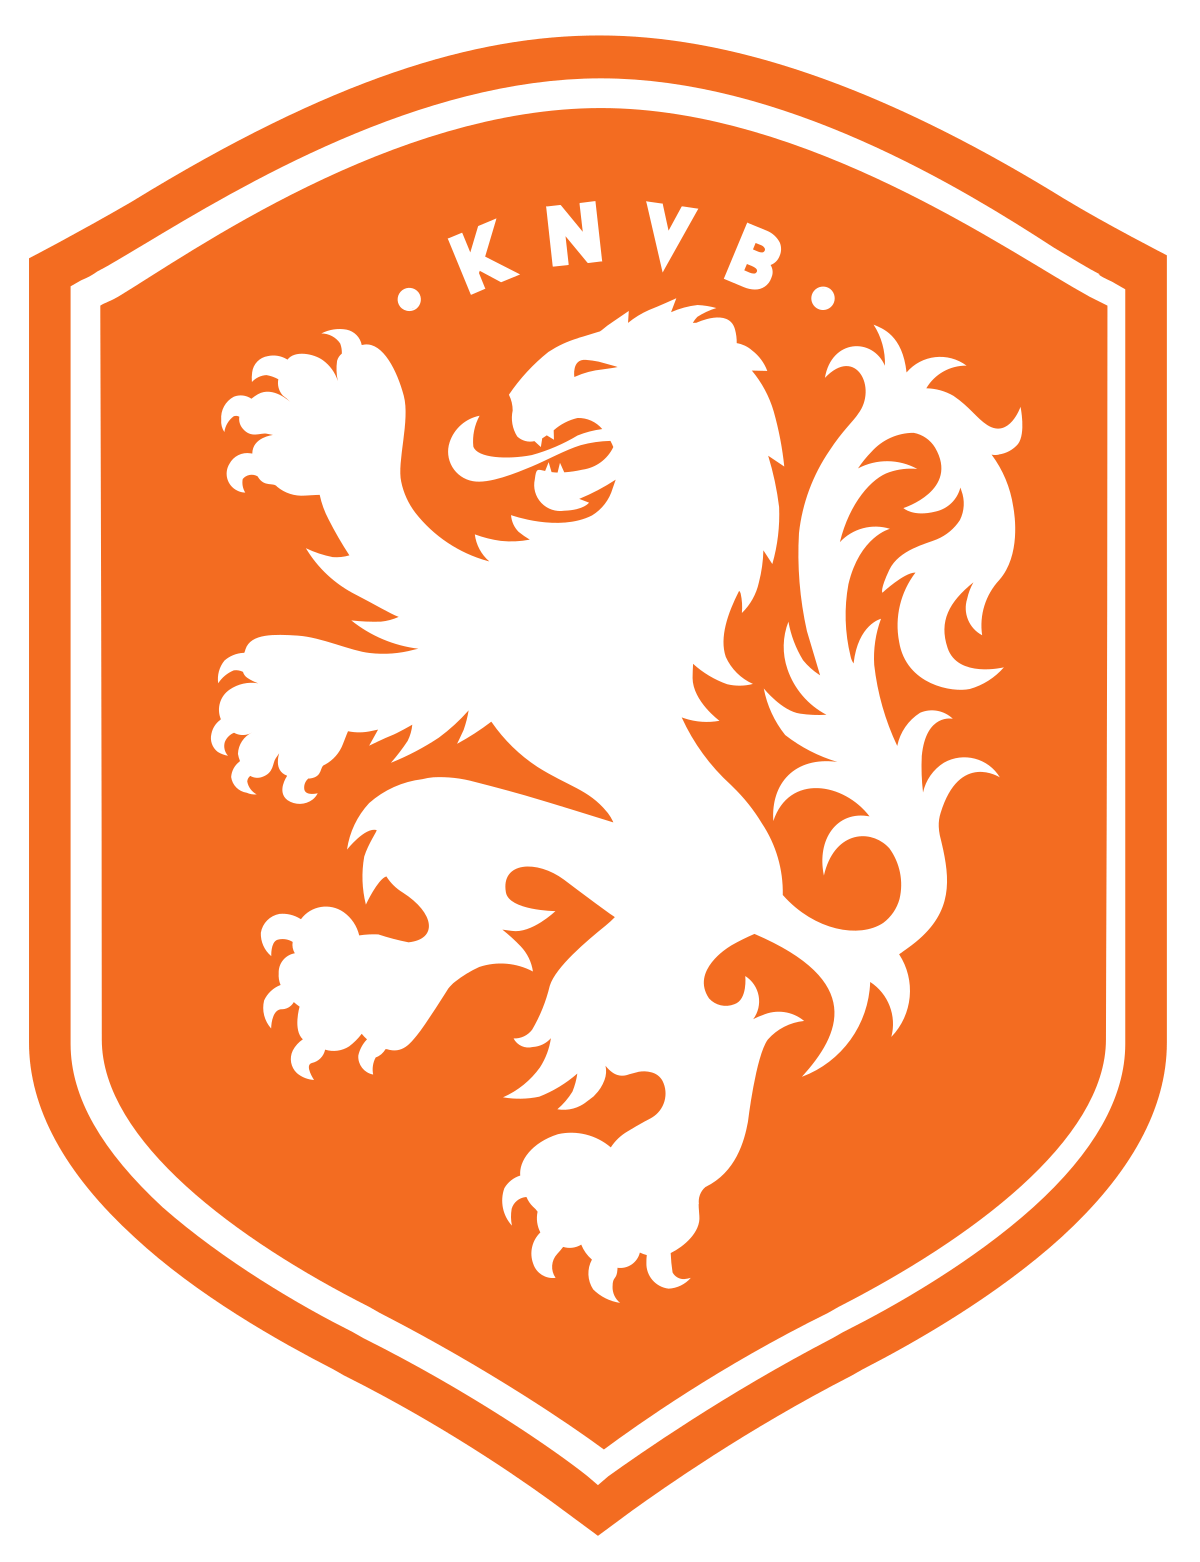 Shop the new national team jerseys by @nikefootball Online now! . . . .  #nike #nikesoccer #nikefootball #nikejersey #knvb #netherlands…